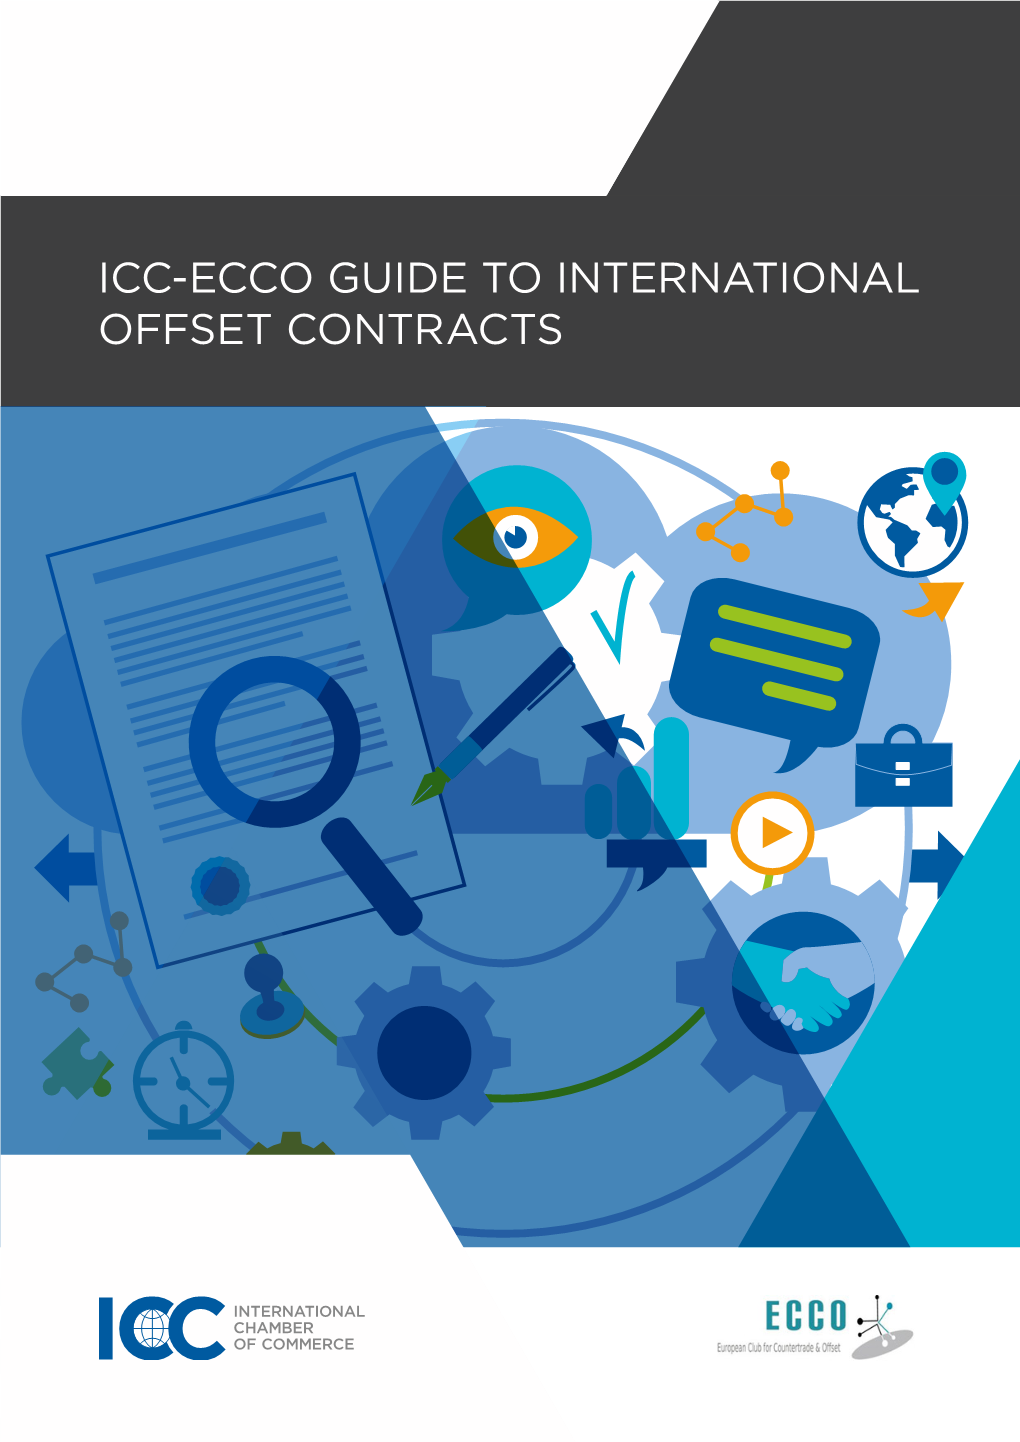 ICC-ECCO Guide to International Offset Contracts (2019)